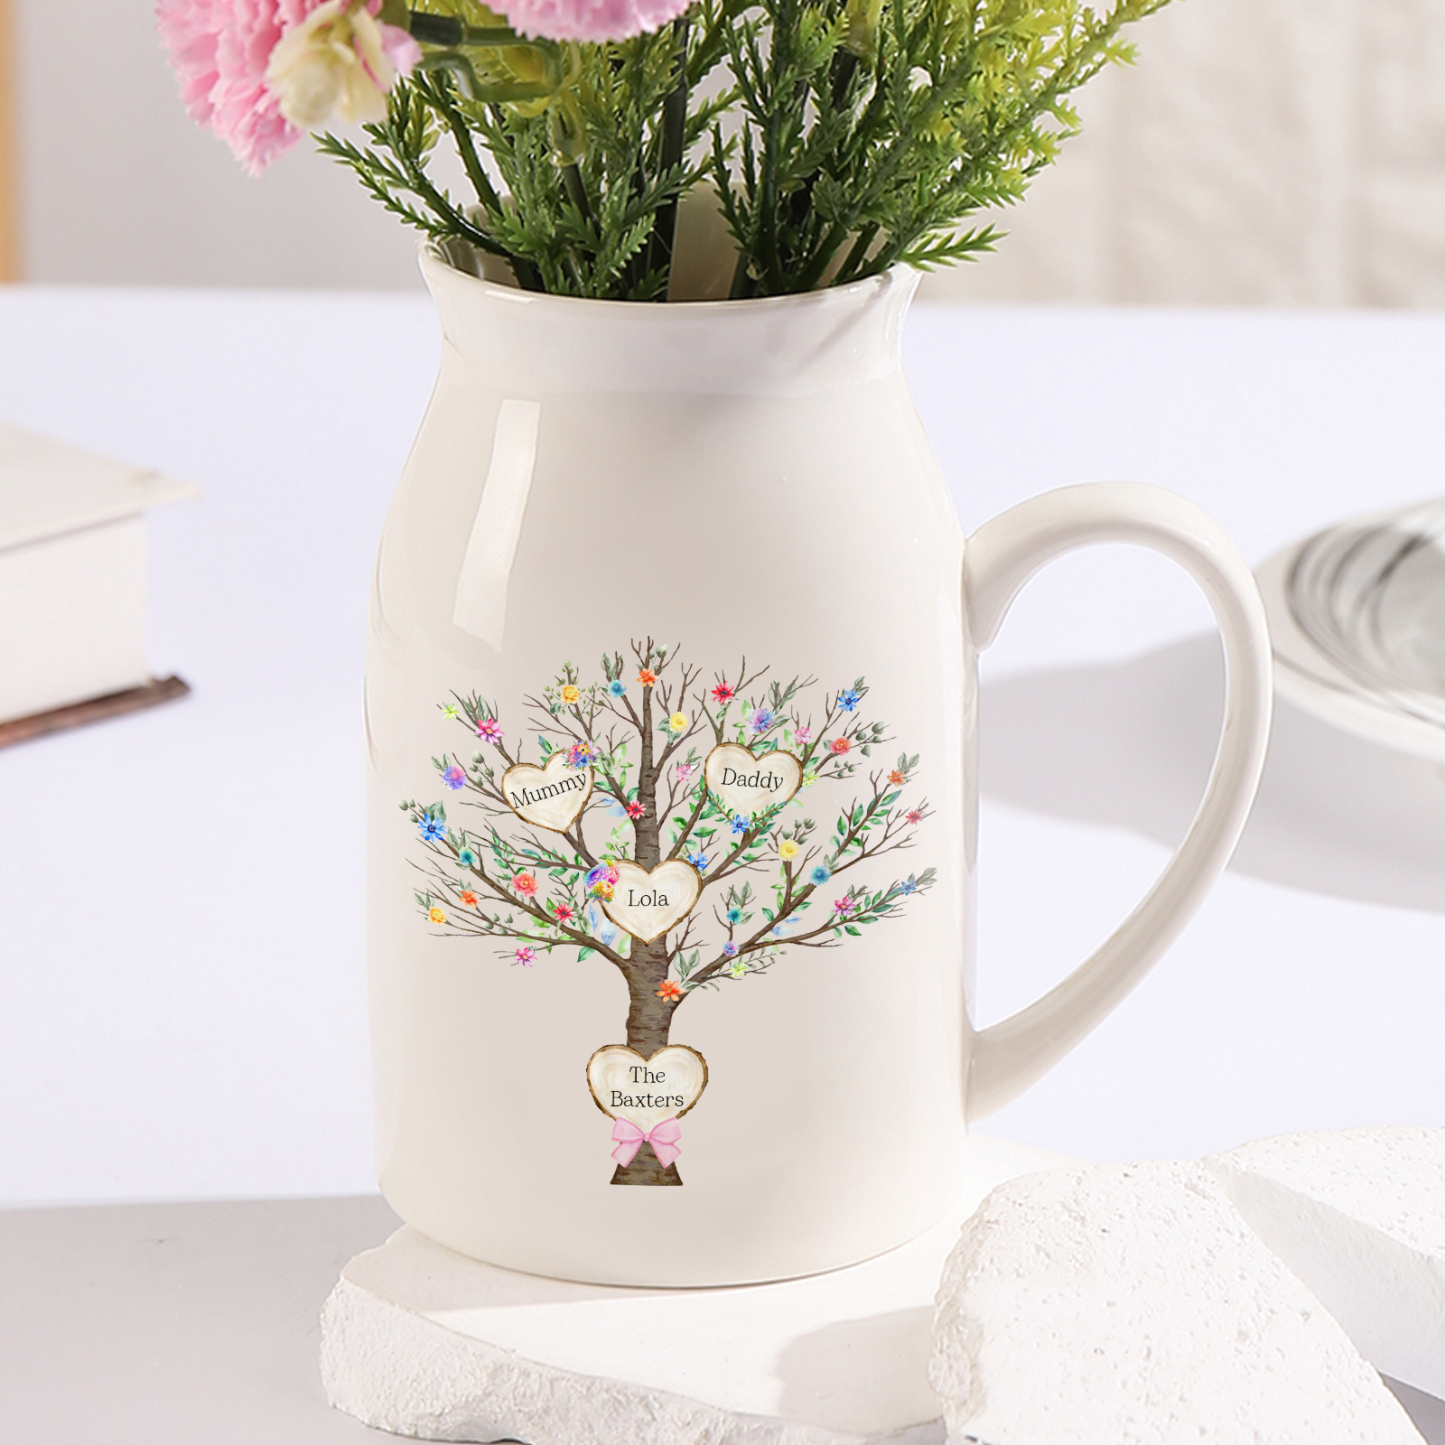 3 Names - Personalized Beautiful Family Tree Style Ceramic Vase with Customizable Names As a Special Gift For Family